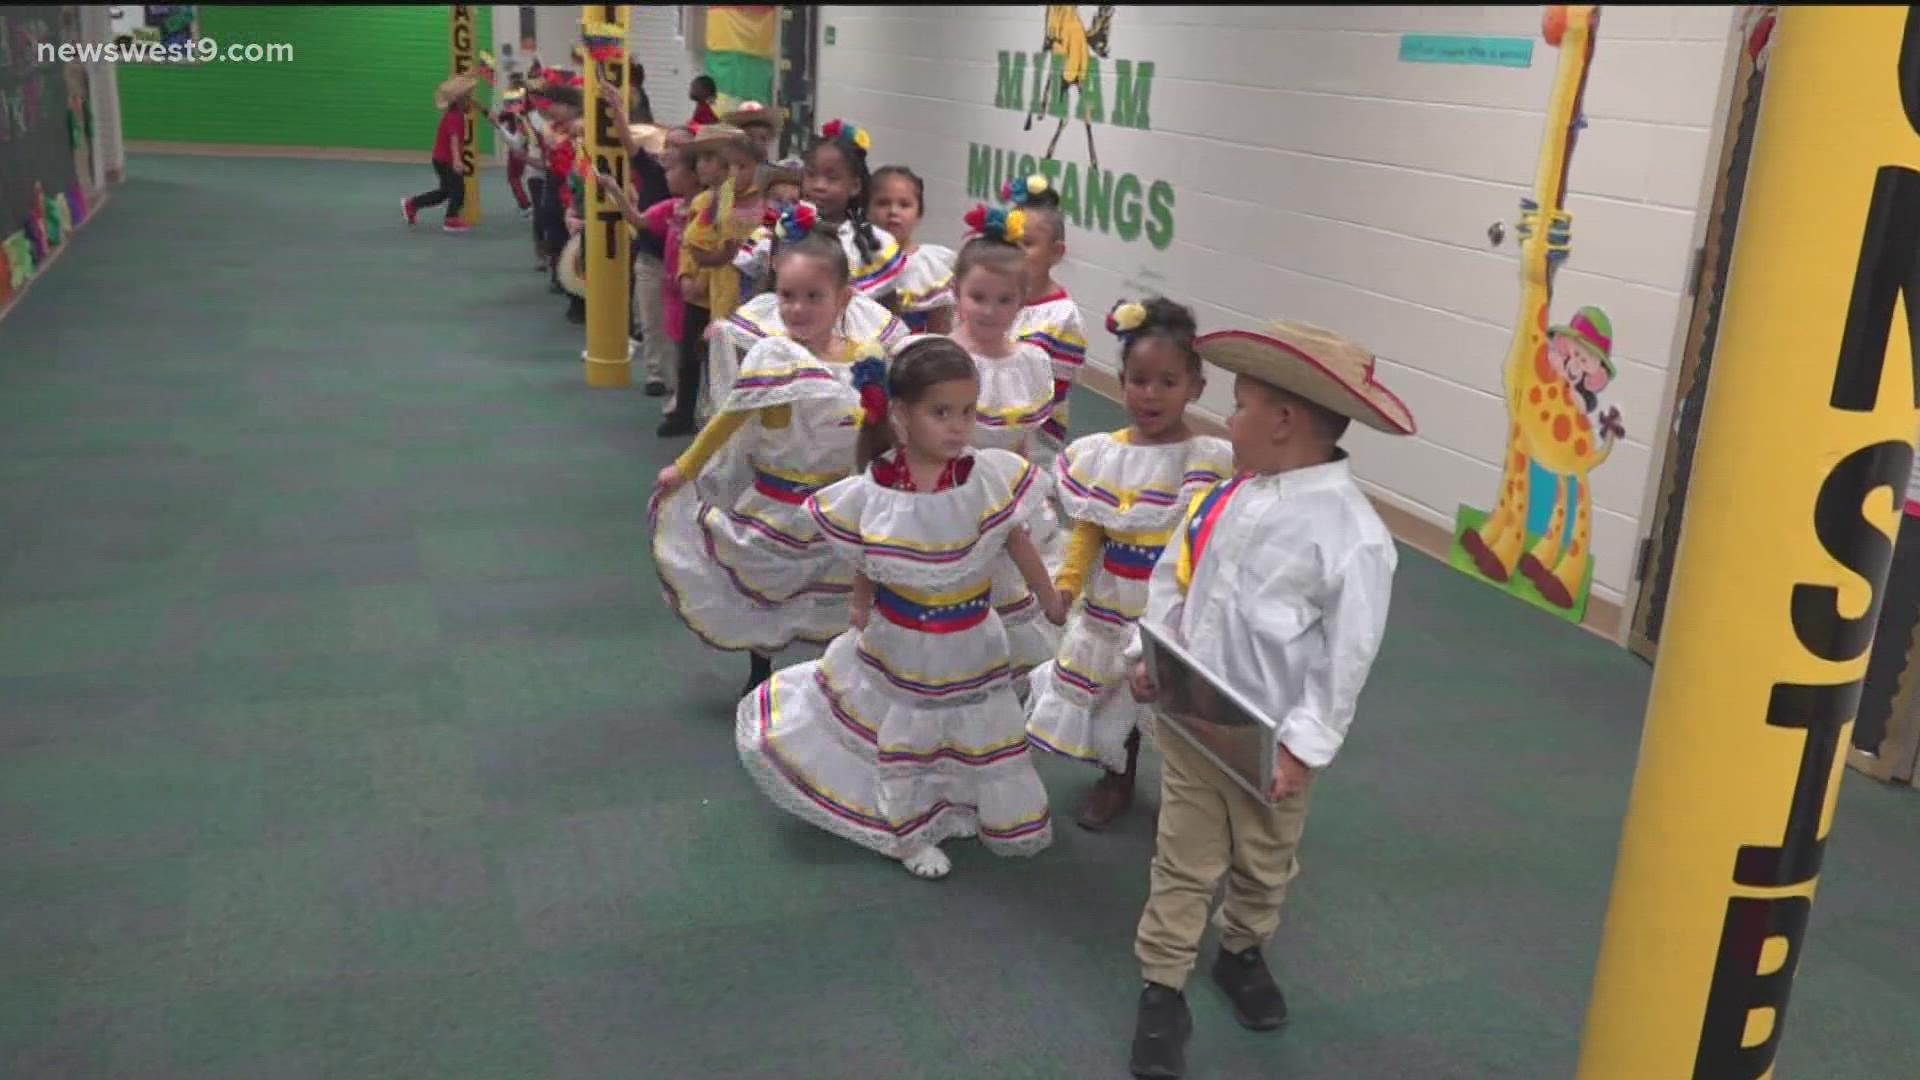 Kids showcased what they have learned about Hispanic arts, music and dance.